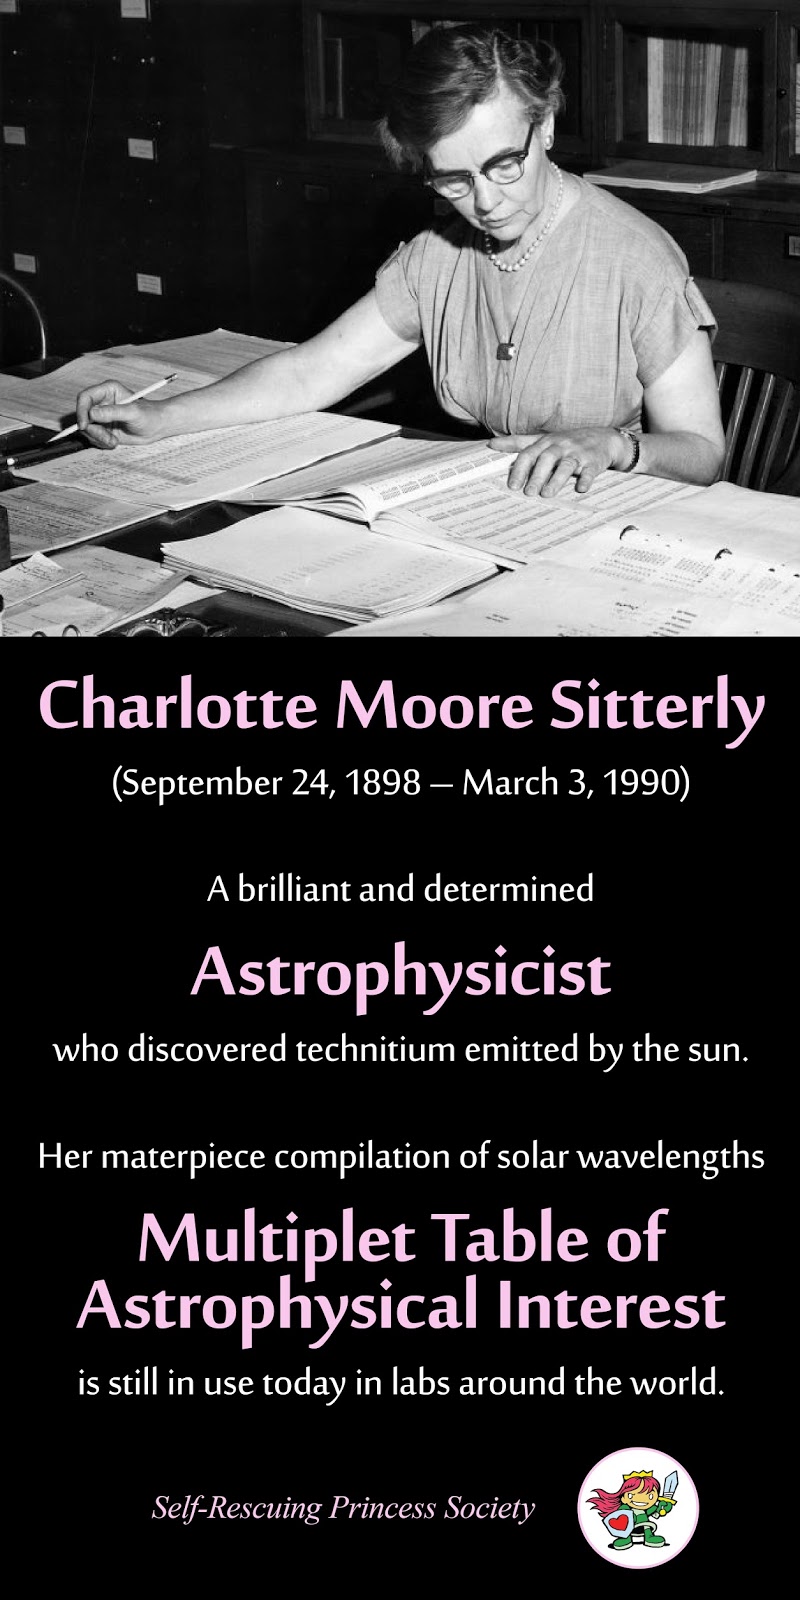 Charlotte Moore Sitterly - Astrophysicist - Self-Rescuing Princess Society